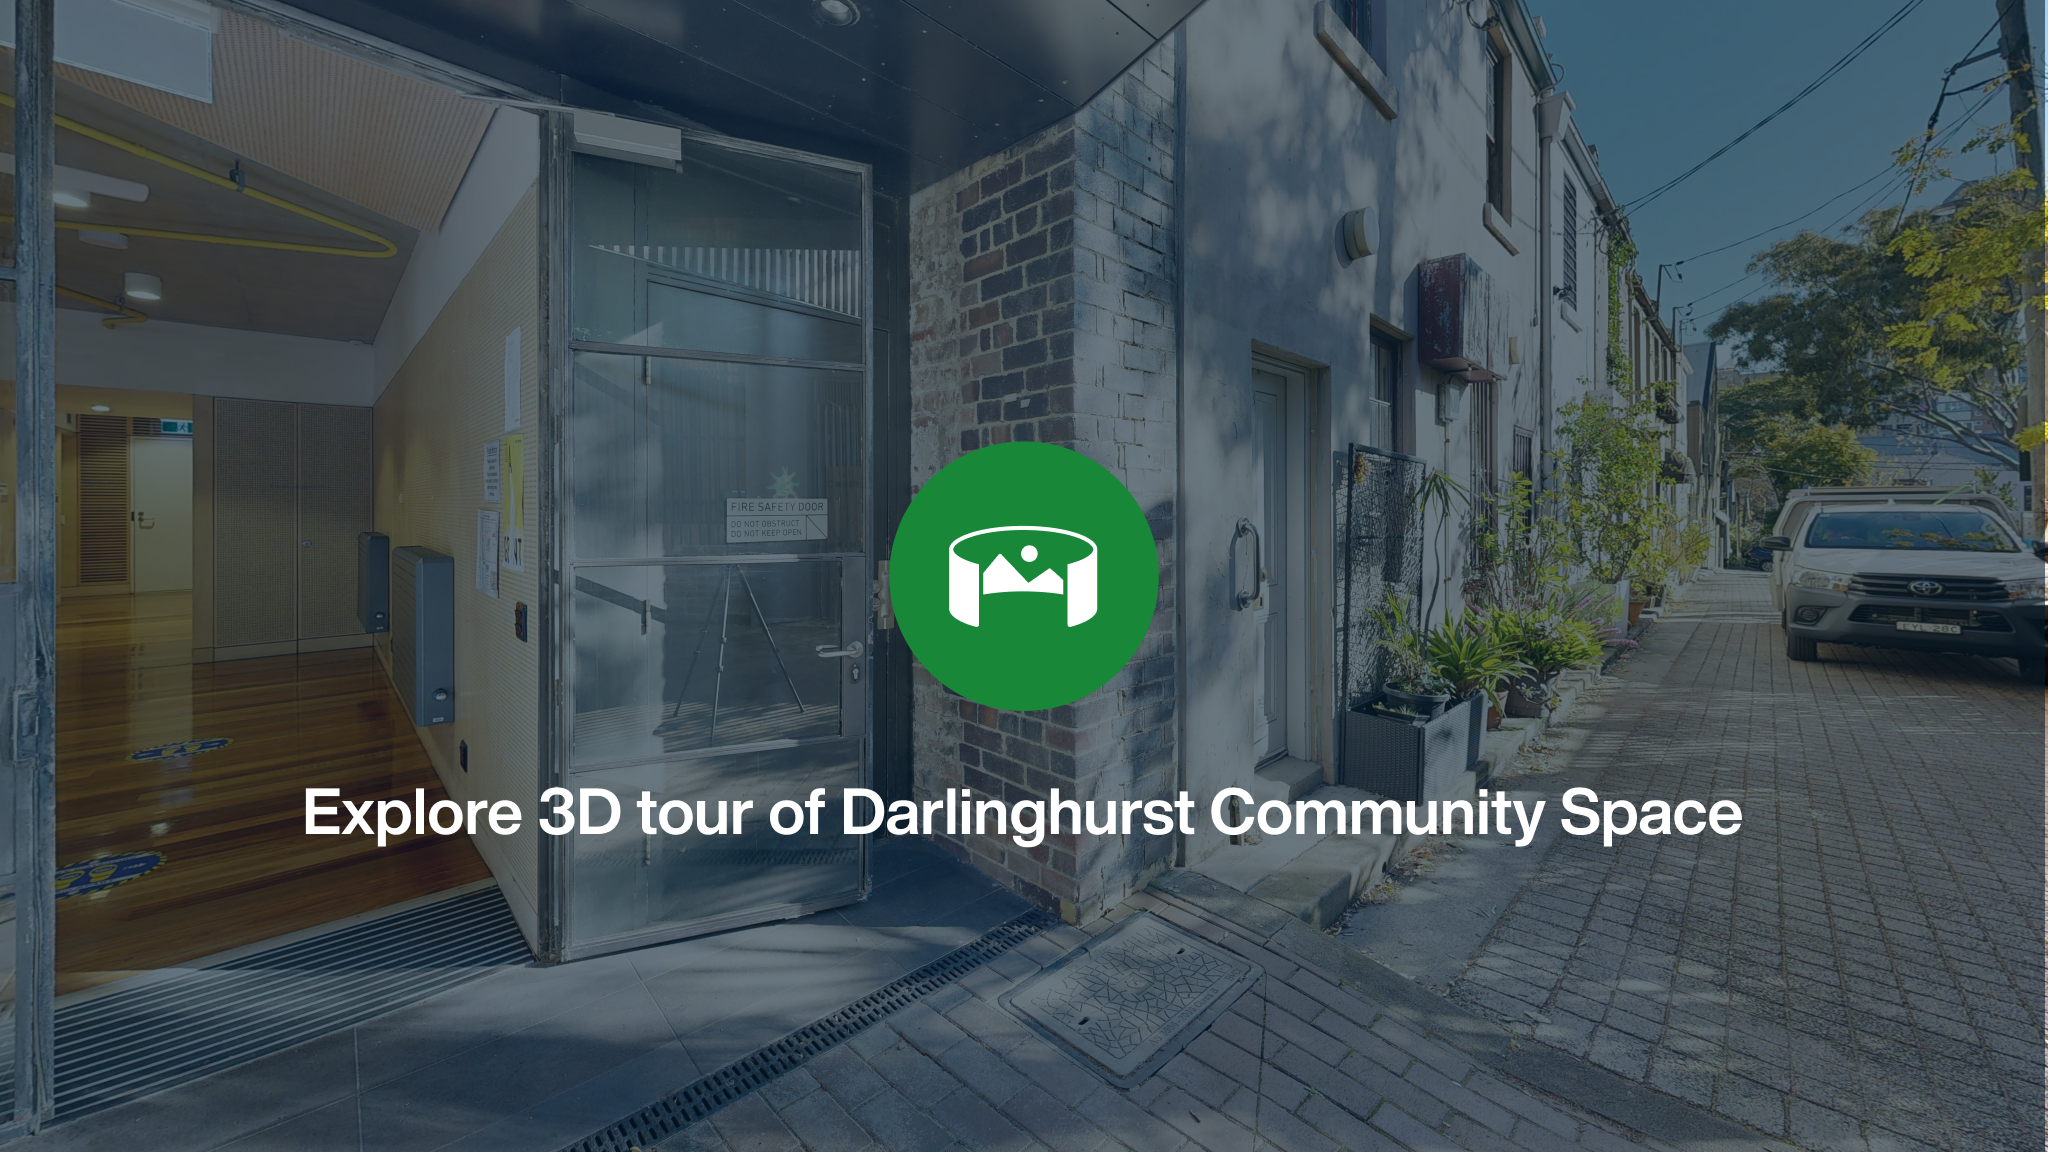 The front entrance to Darlinghurst Community Space overlayed with a green icon and the words Explore 3D tour of Darlinghurst Community Space.